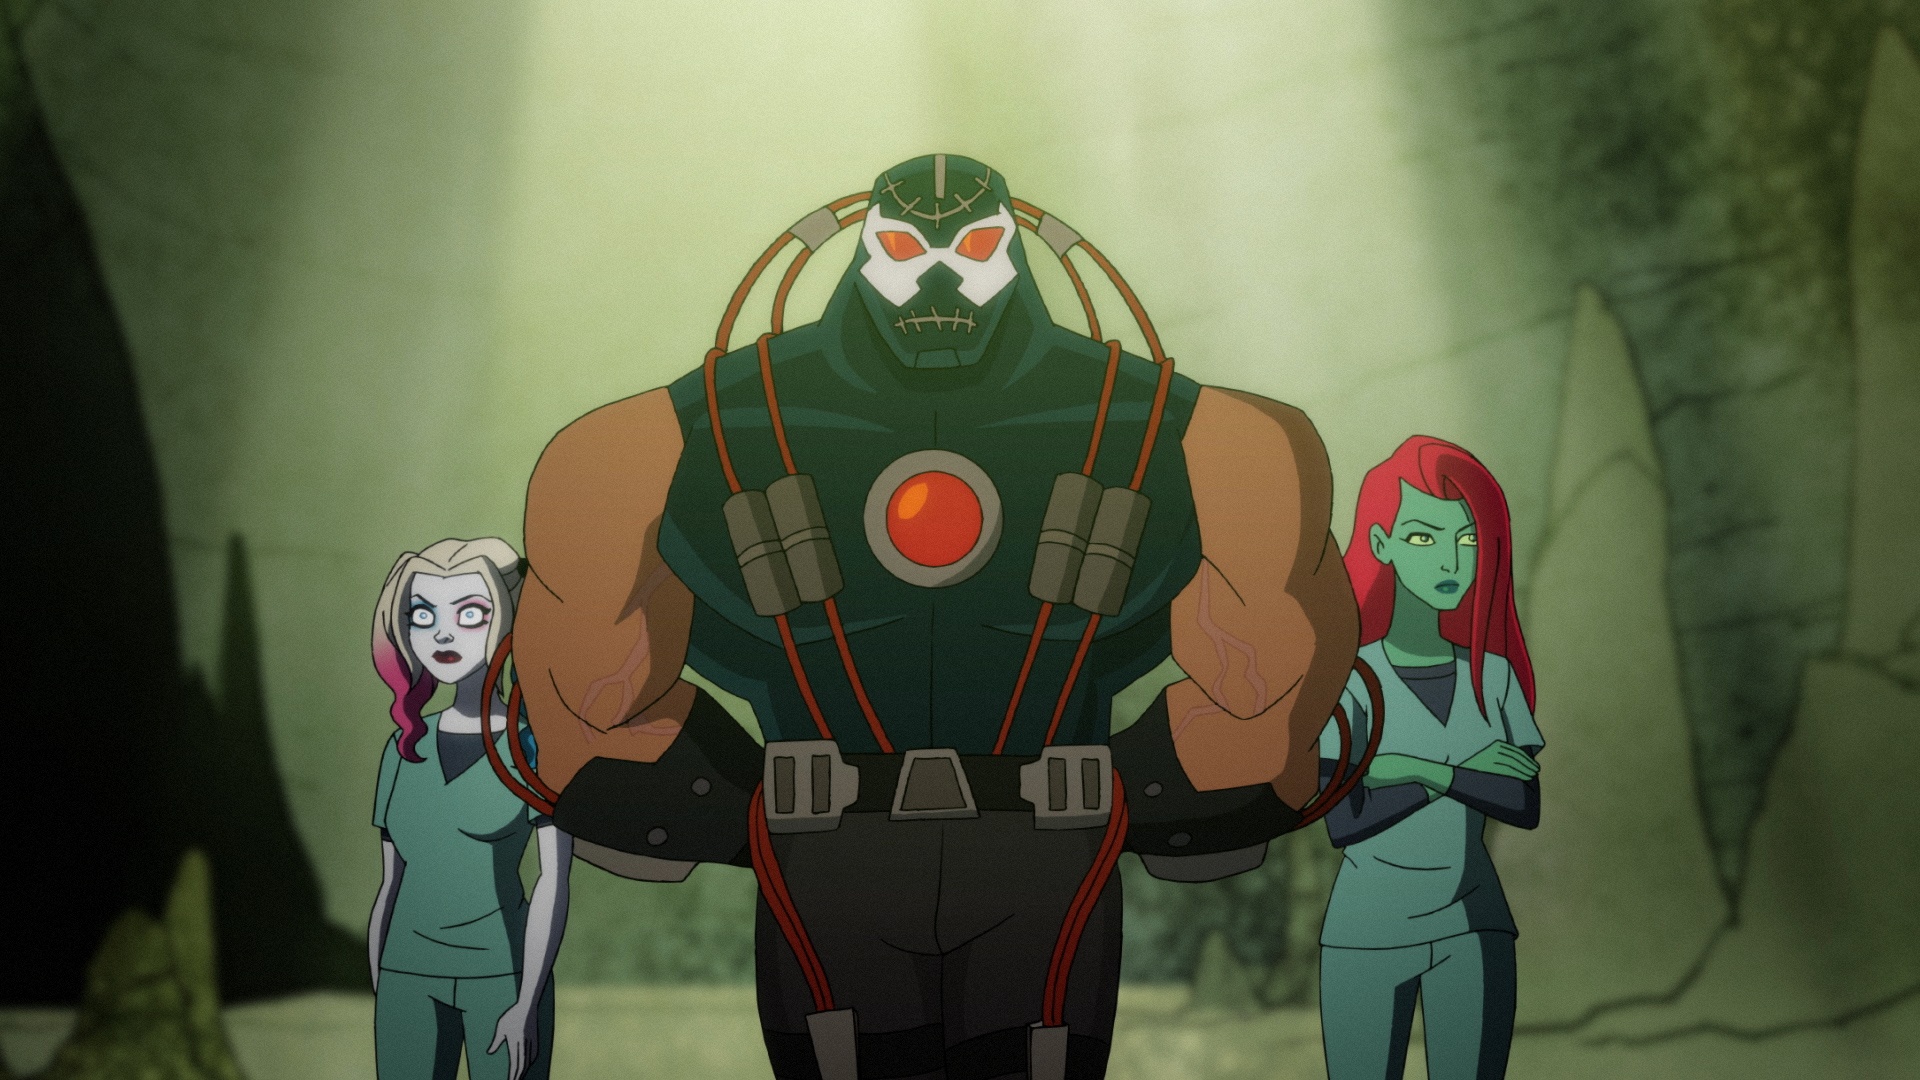 Bane attentively leads prisoners Harley and Ivy in "the Pit."